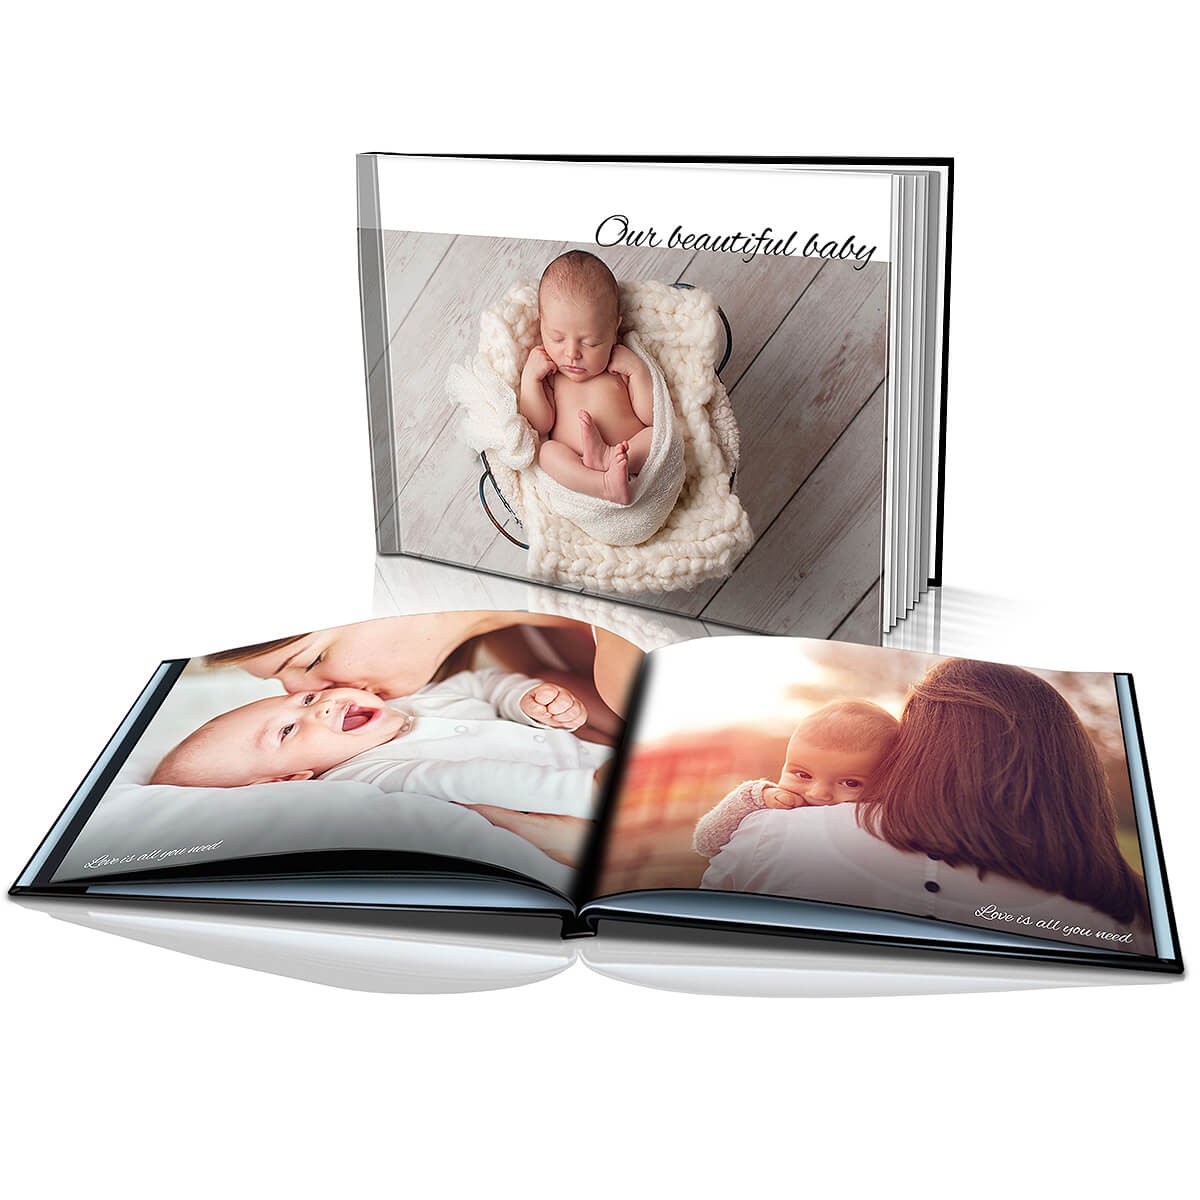 11"x8" (28x20cm) Hard Cover Book 20-120 pages